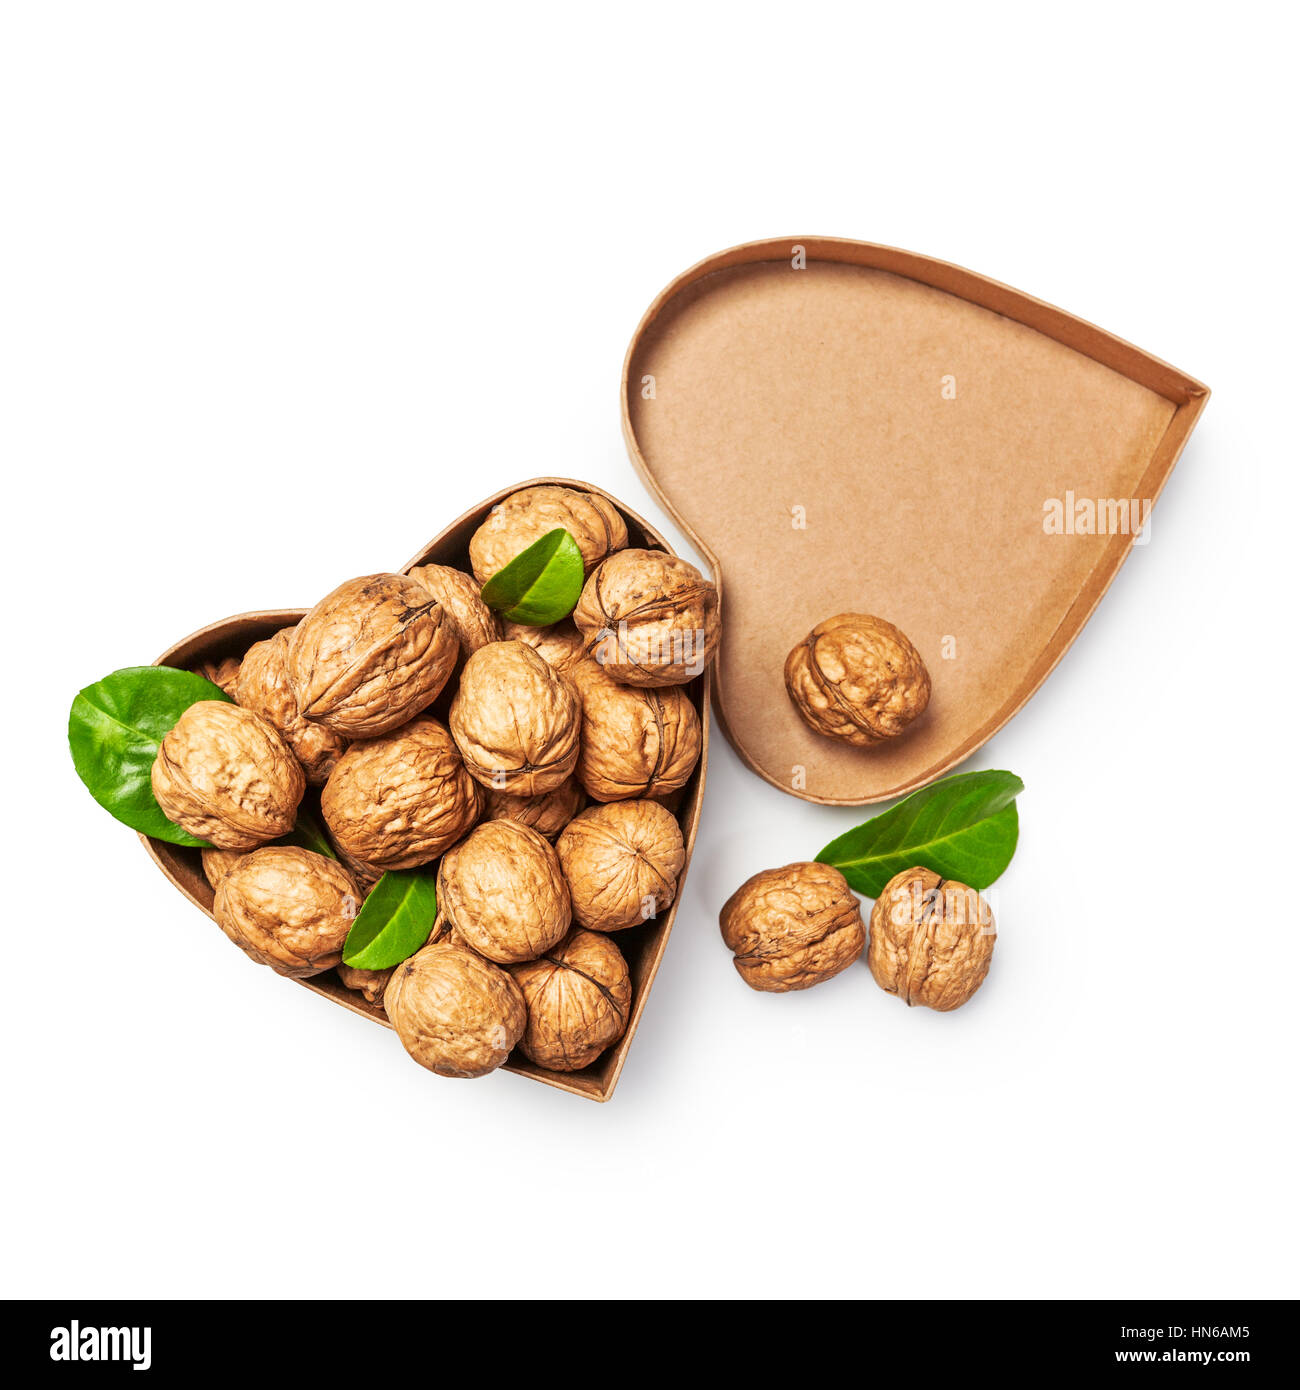 Walnuts in heart shaped box as healthy eating and dieting concept, objects group isolated on white background with clipping path, top view, flat lay Stock Photo